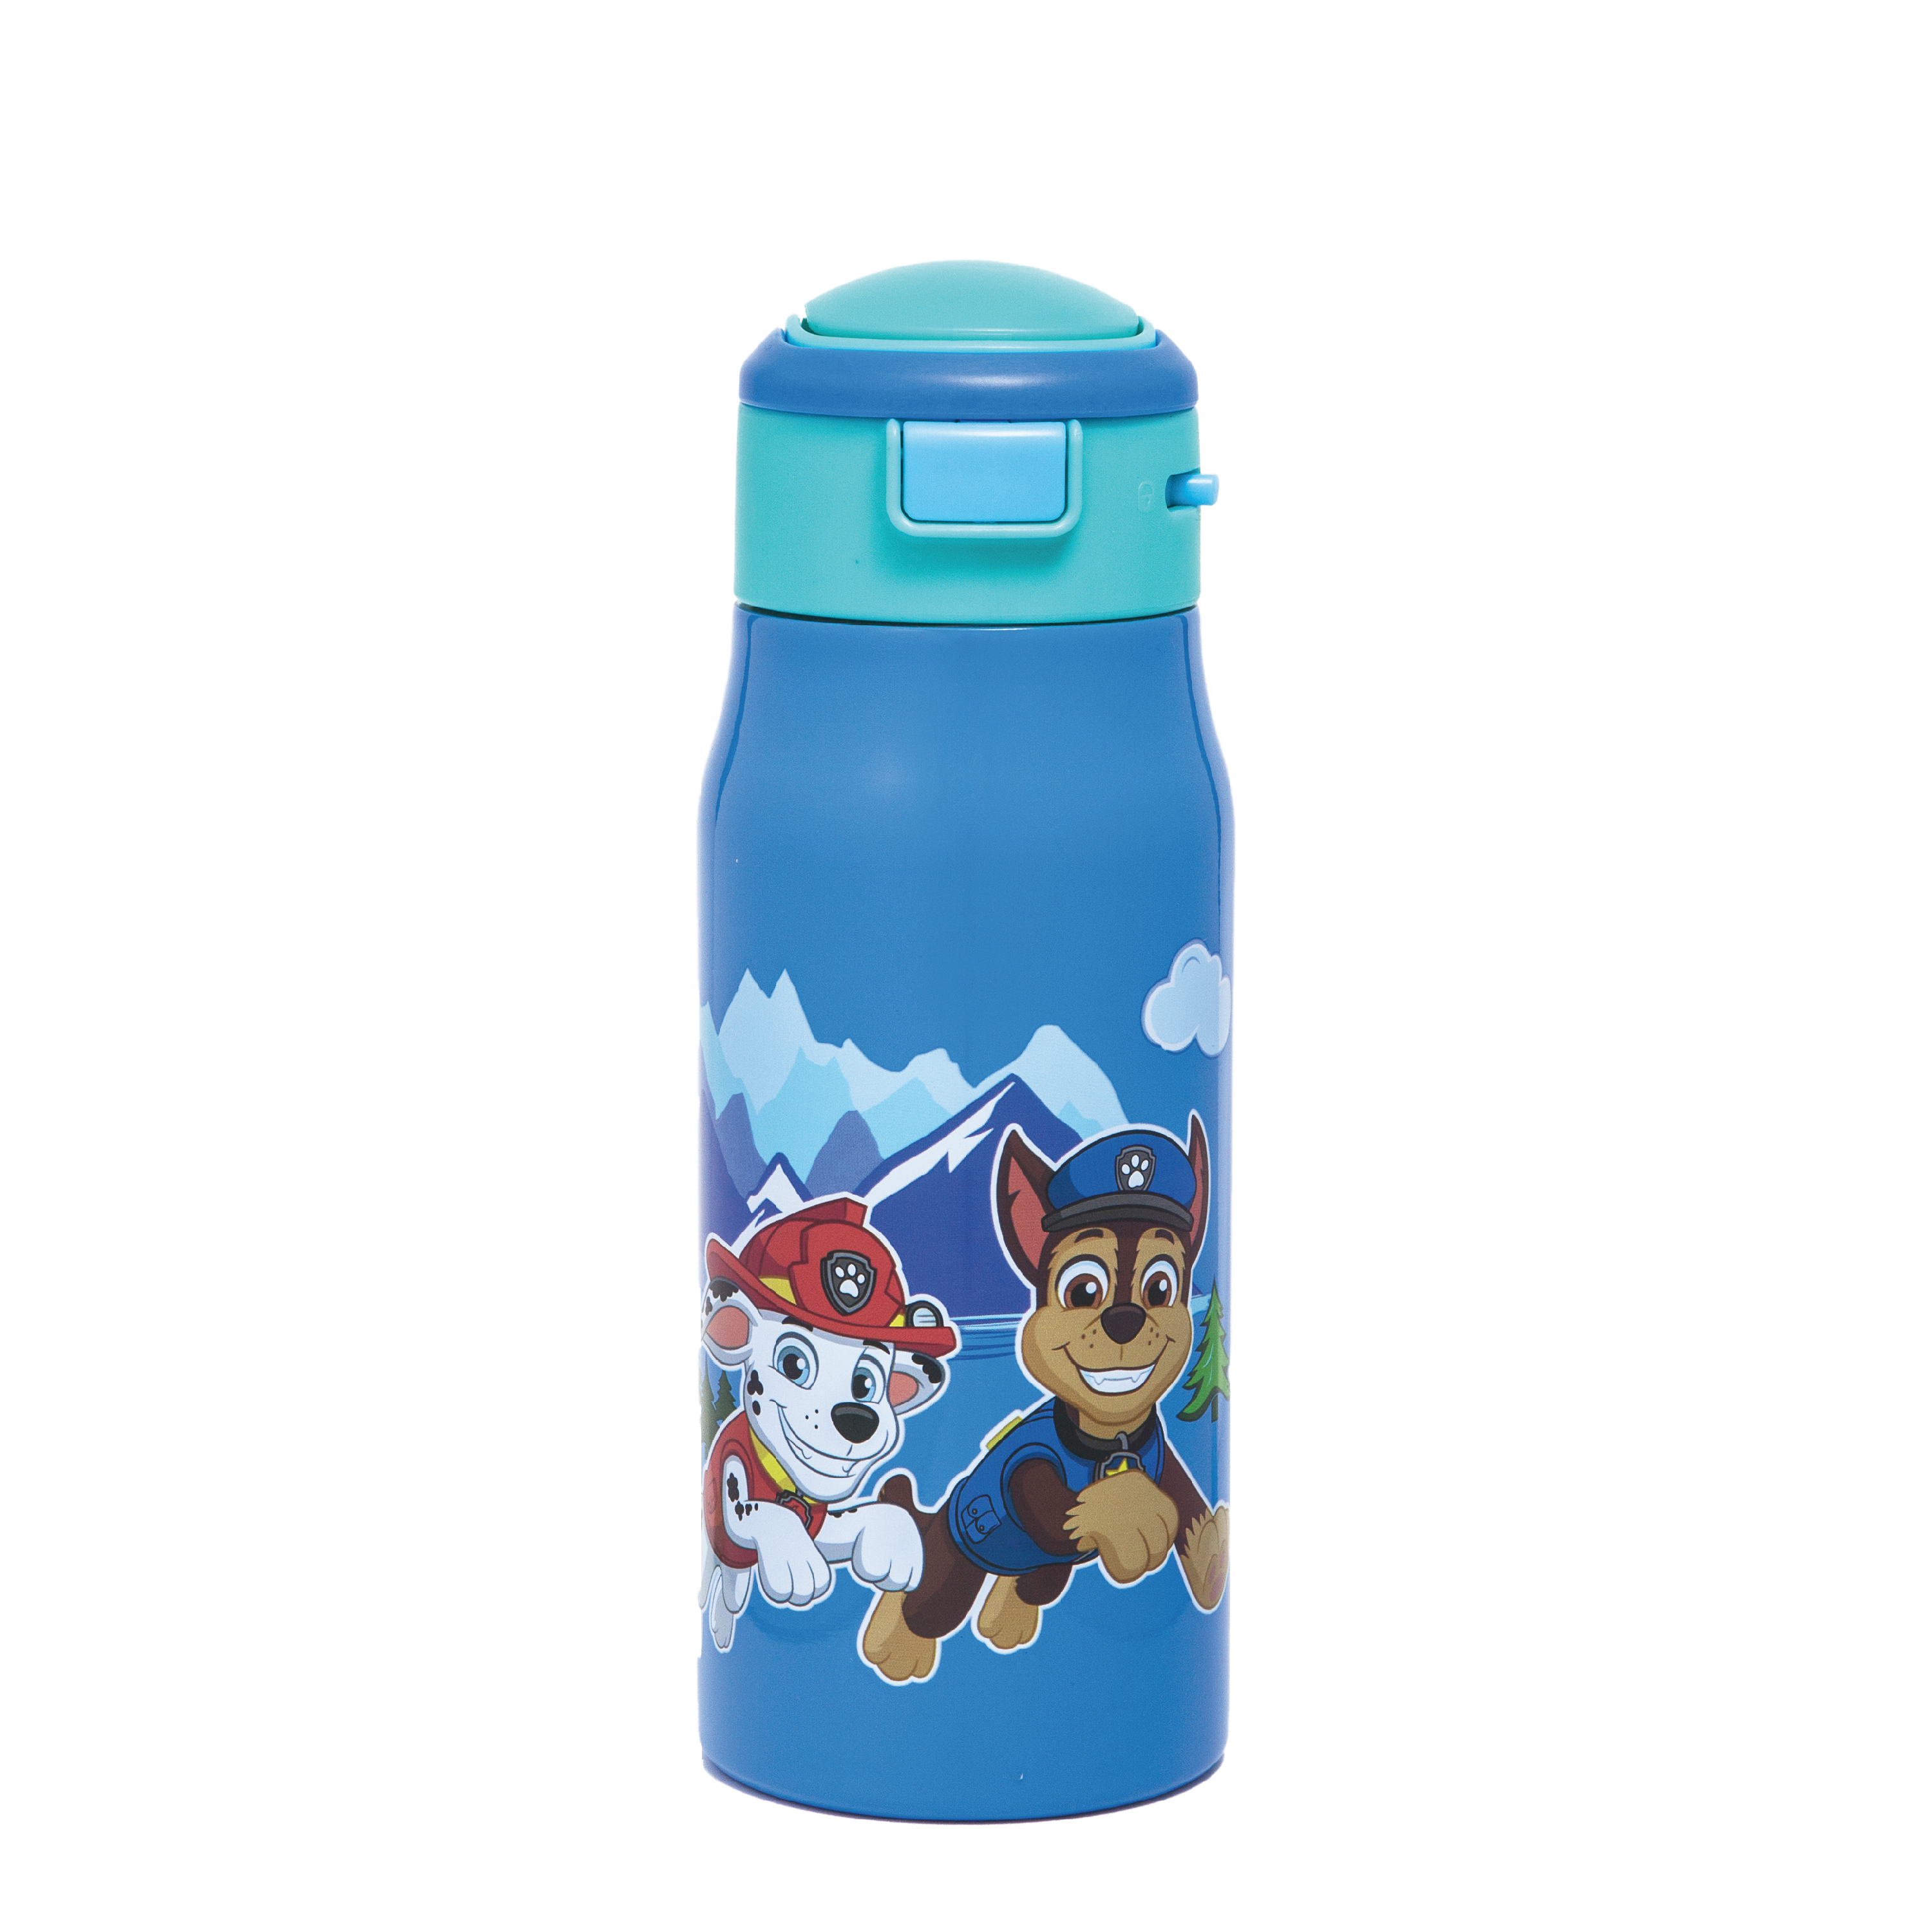 Paw Patrol 13.5 ounce Mesa Double Wall Insulated Stainless Steel Water Bottle, Chase and Marshall slideshow image 1